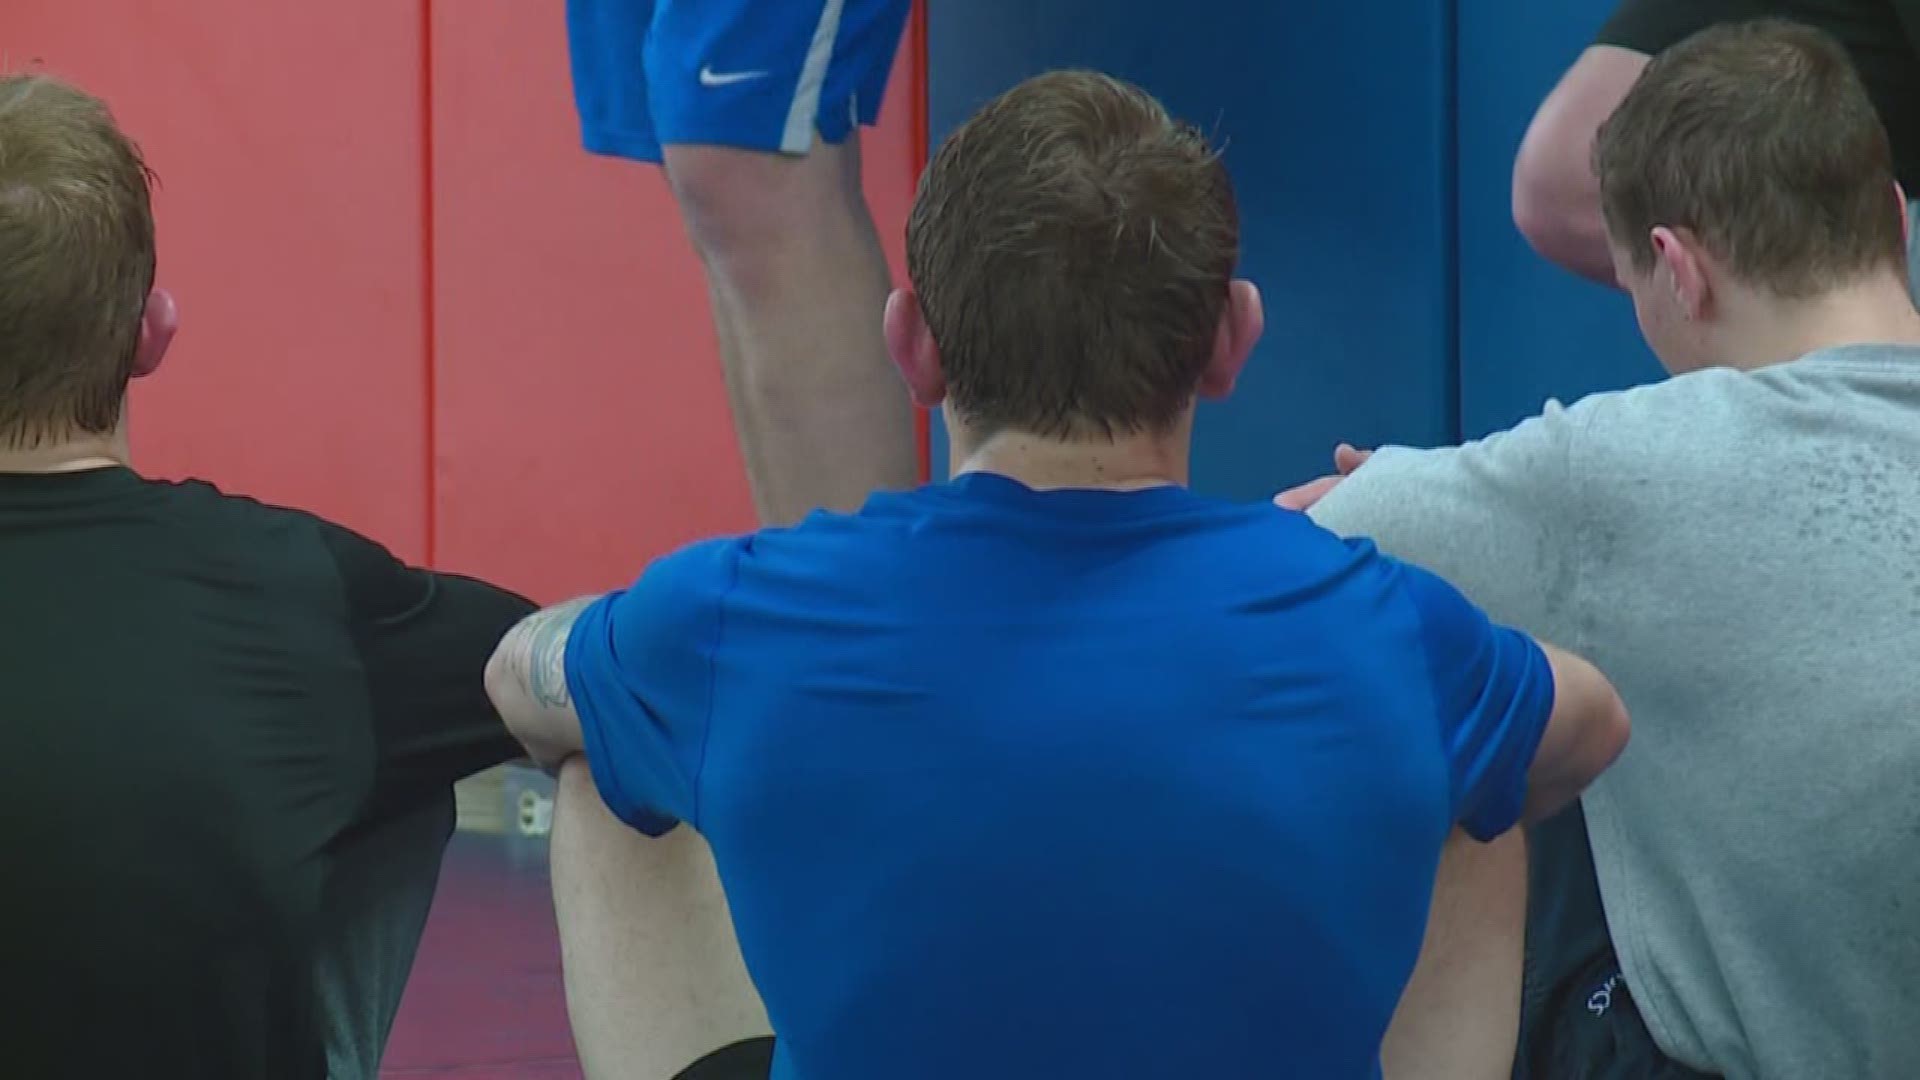 Boise State President Bob Kustra told KTVB's Jay Tust that it was an extremely difficult decision to eliminate the wrestling program, but one that had to be made in the school's quest to add a baseball program.